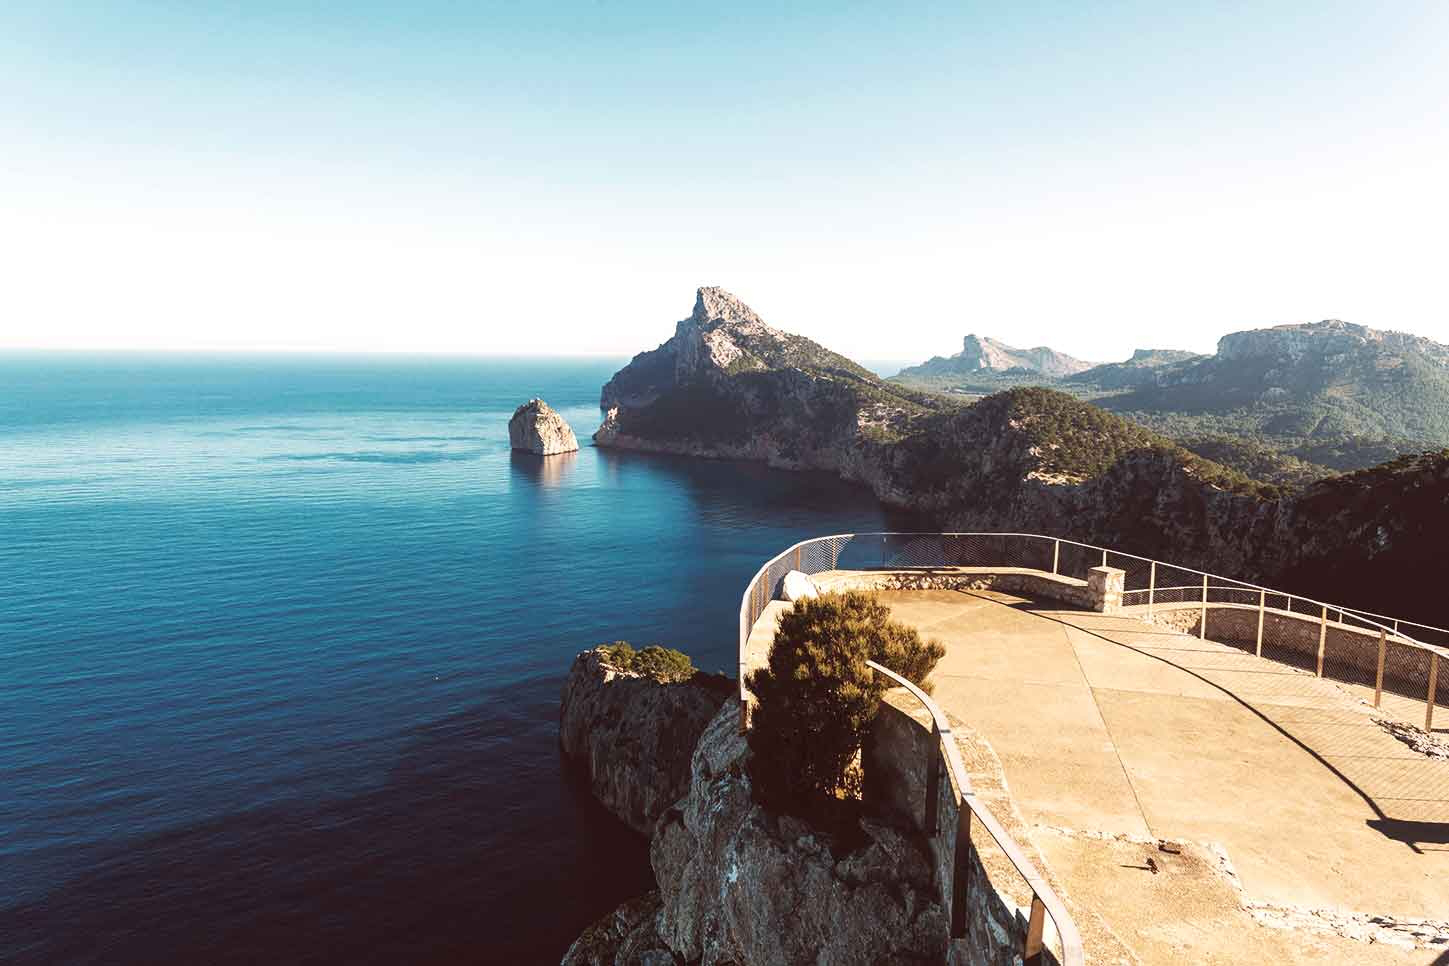 To see some of the most beautiful places in Majorca you need to get up high